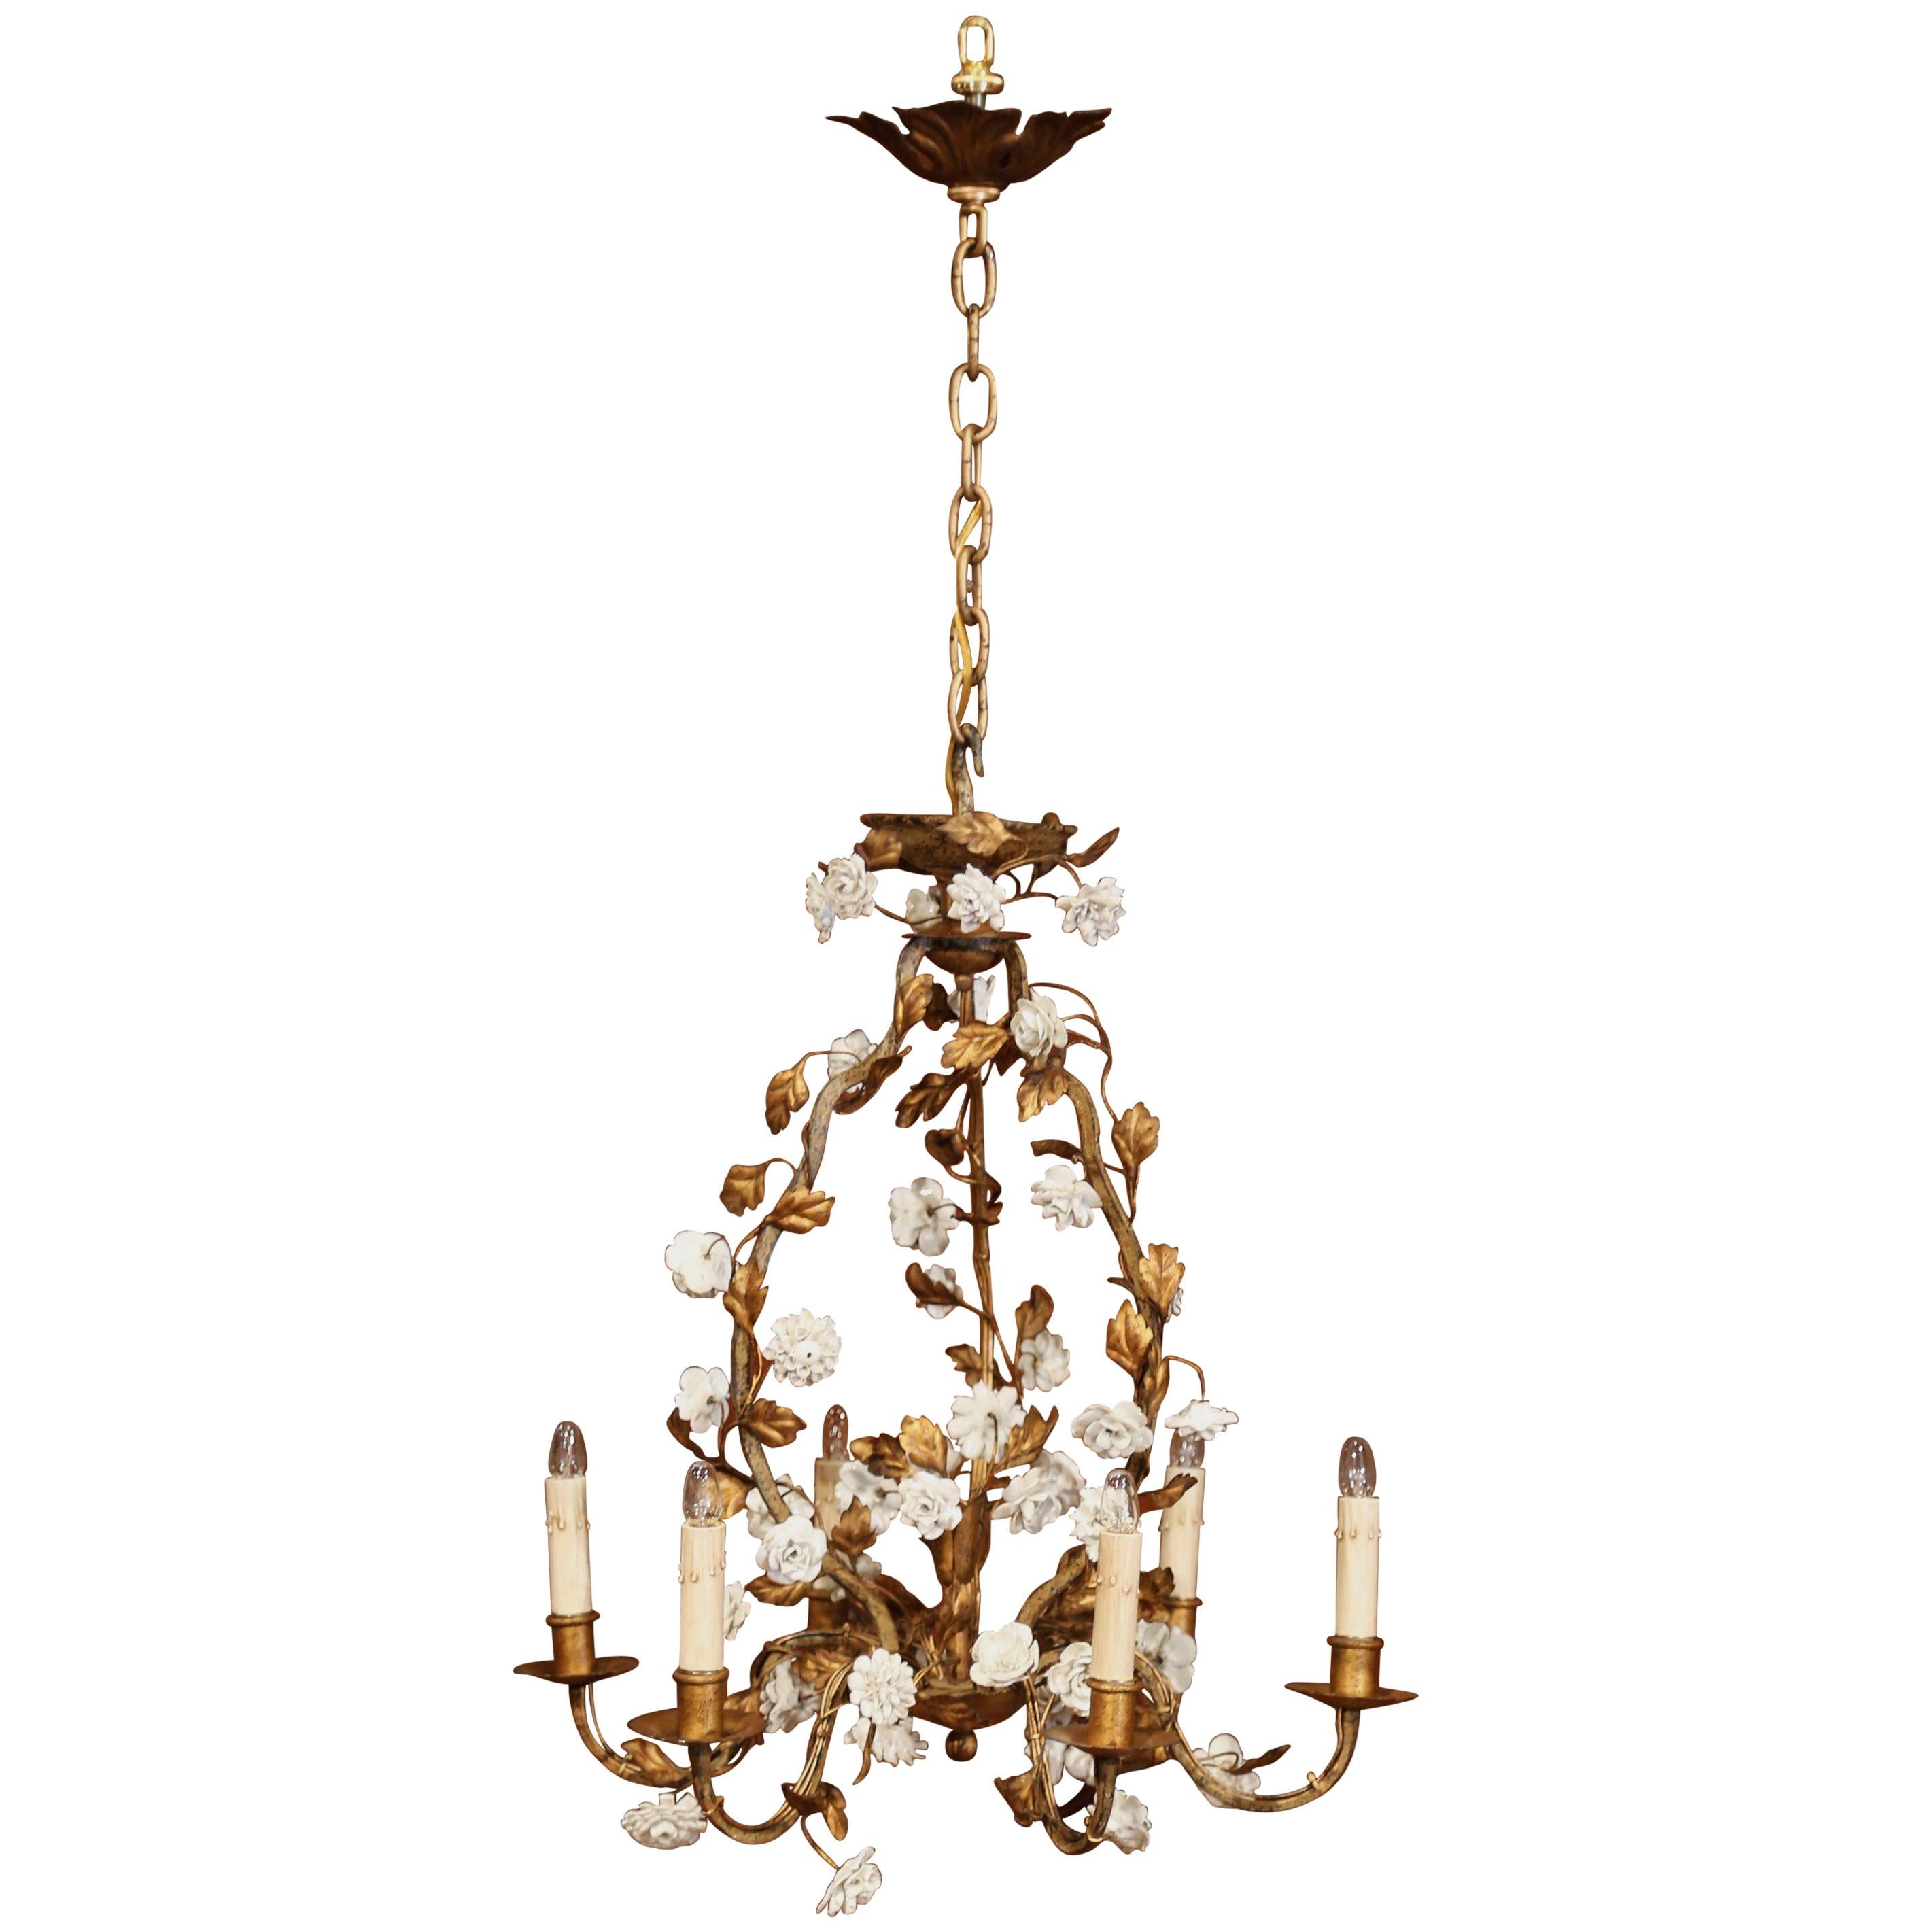 Early 20th Century French Six-Light Chandelier with Porcelain Flowers and Leaves